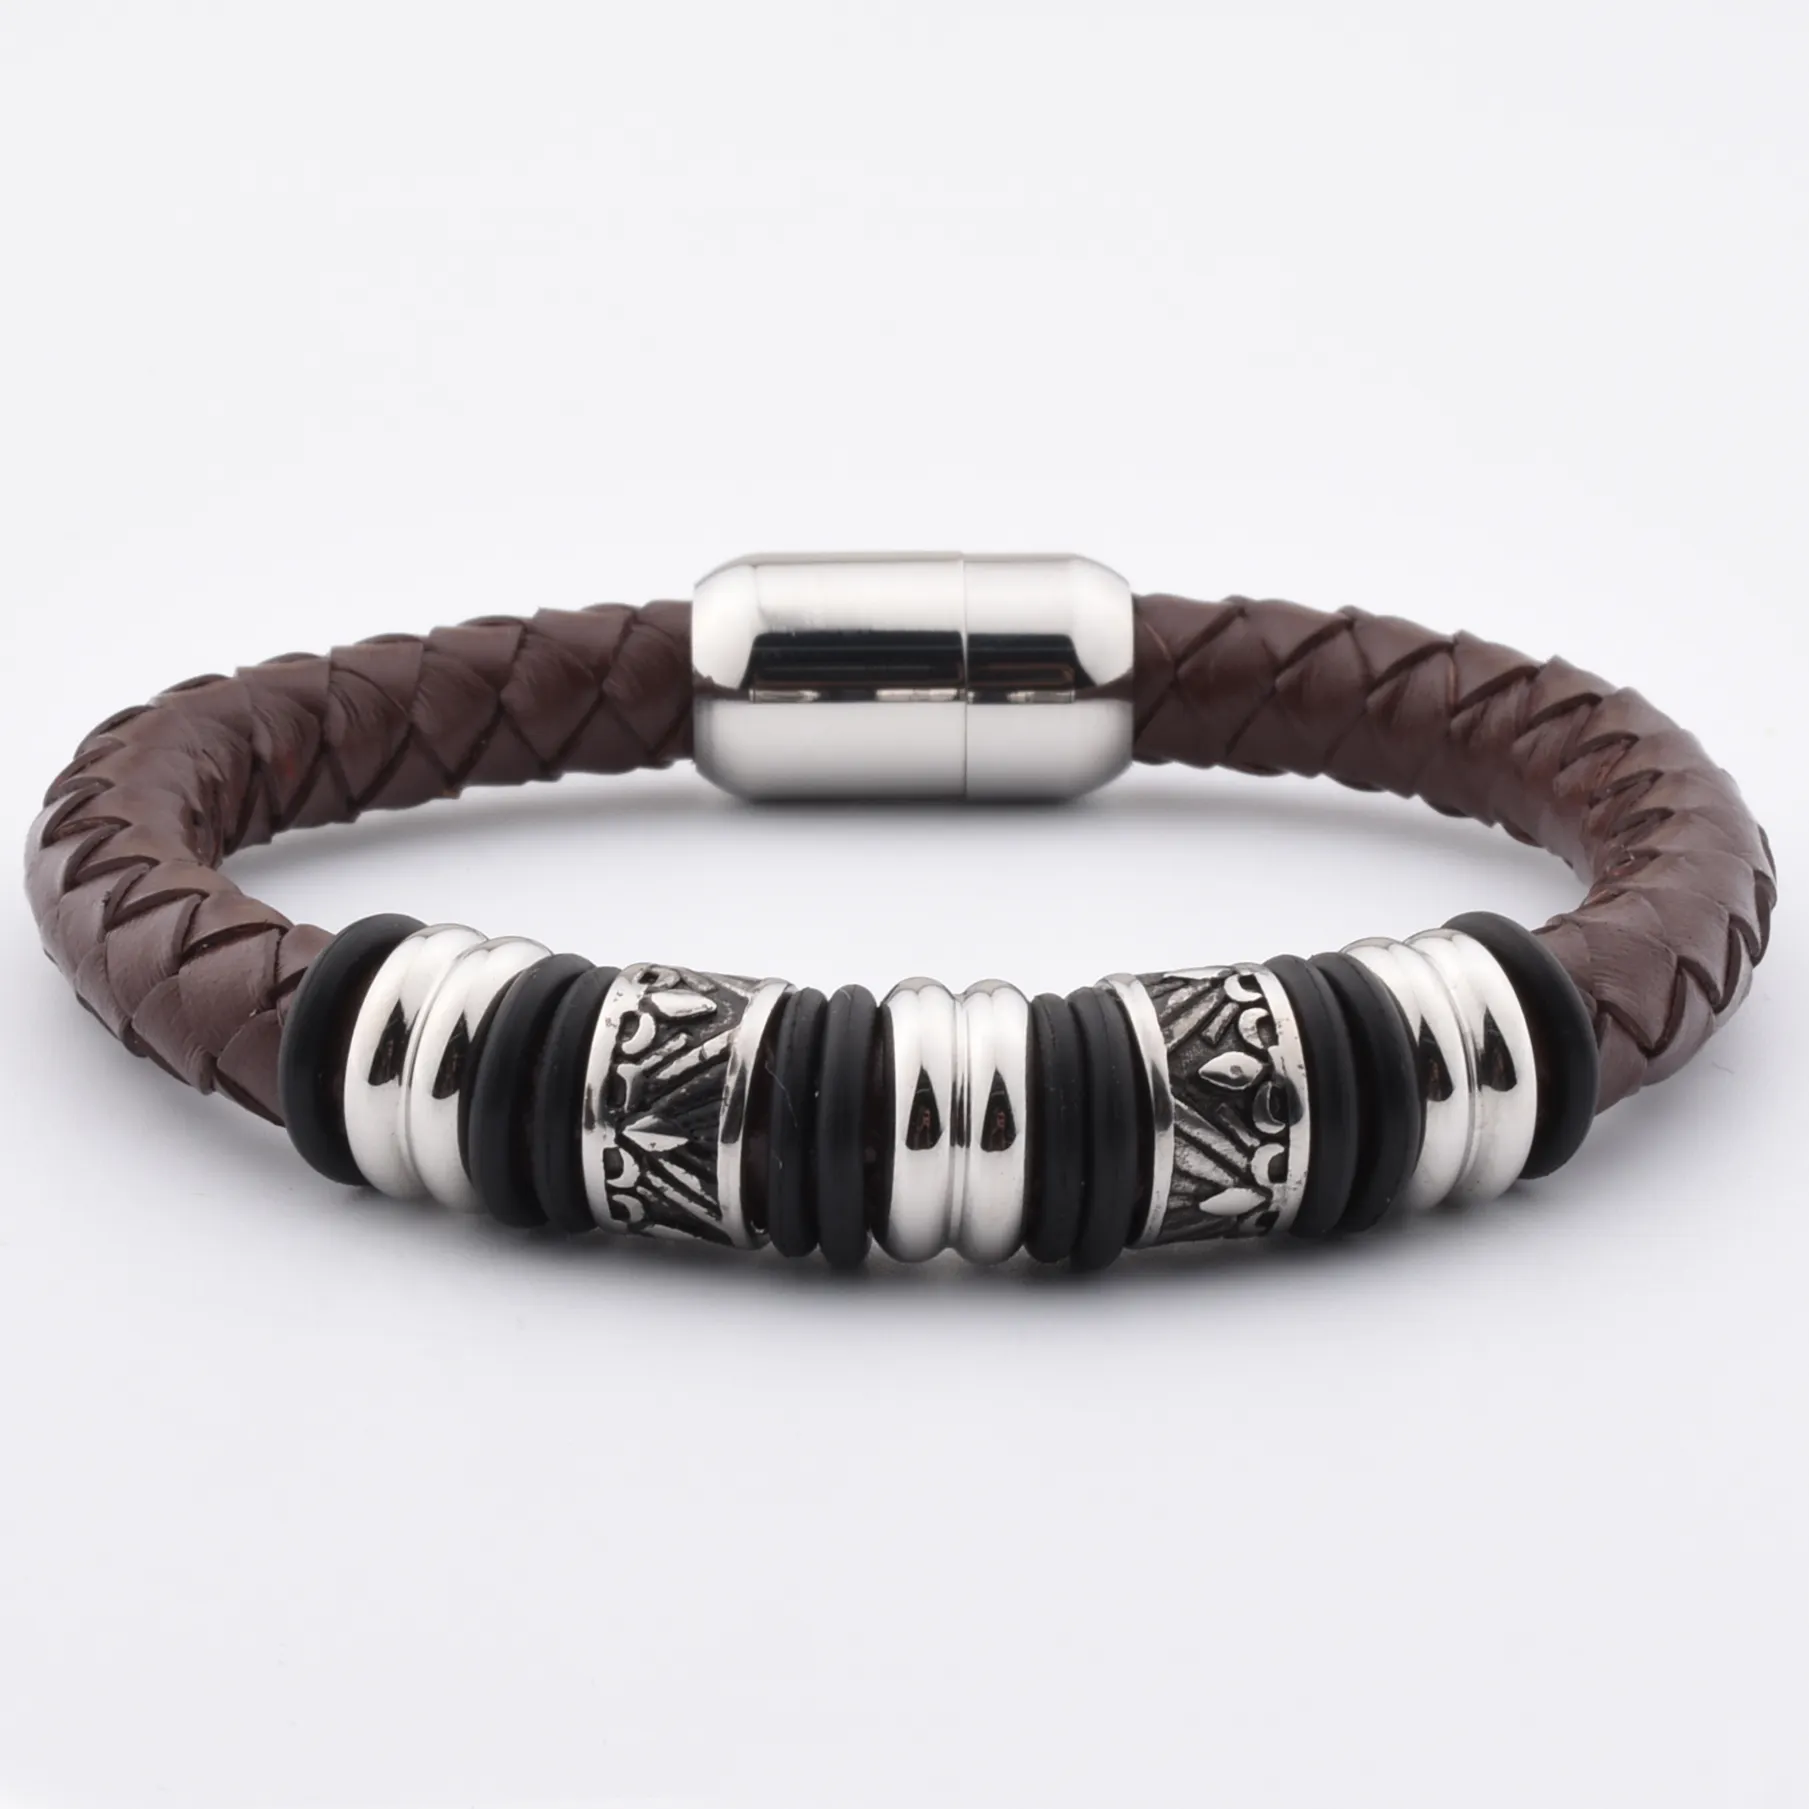 Personalized Jewelry Tan Brown Leather Wide Wristbands Cool Mens Leather Bracelets